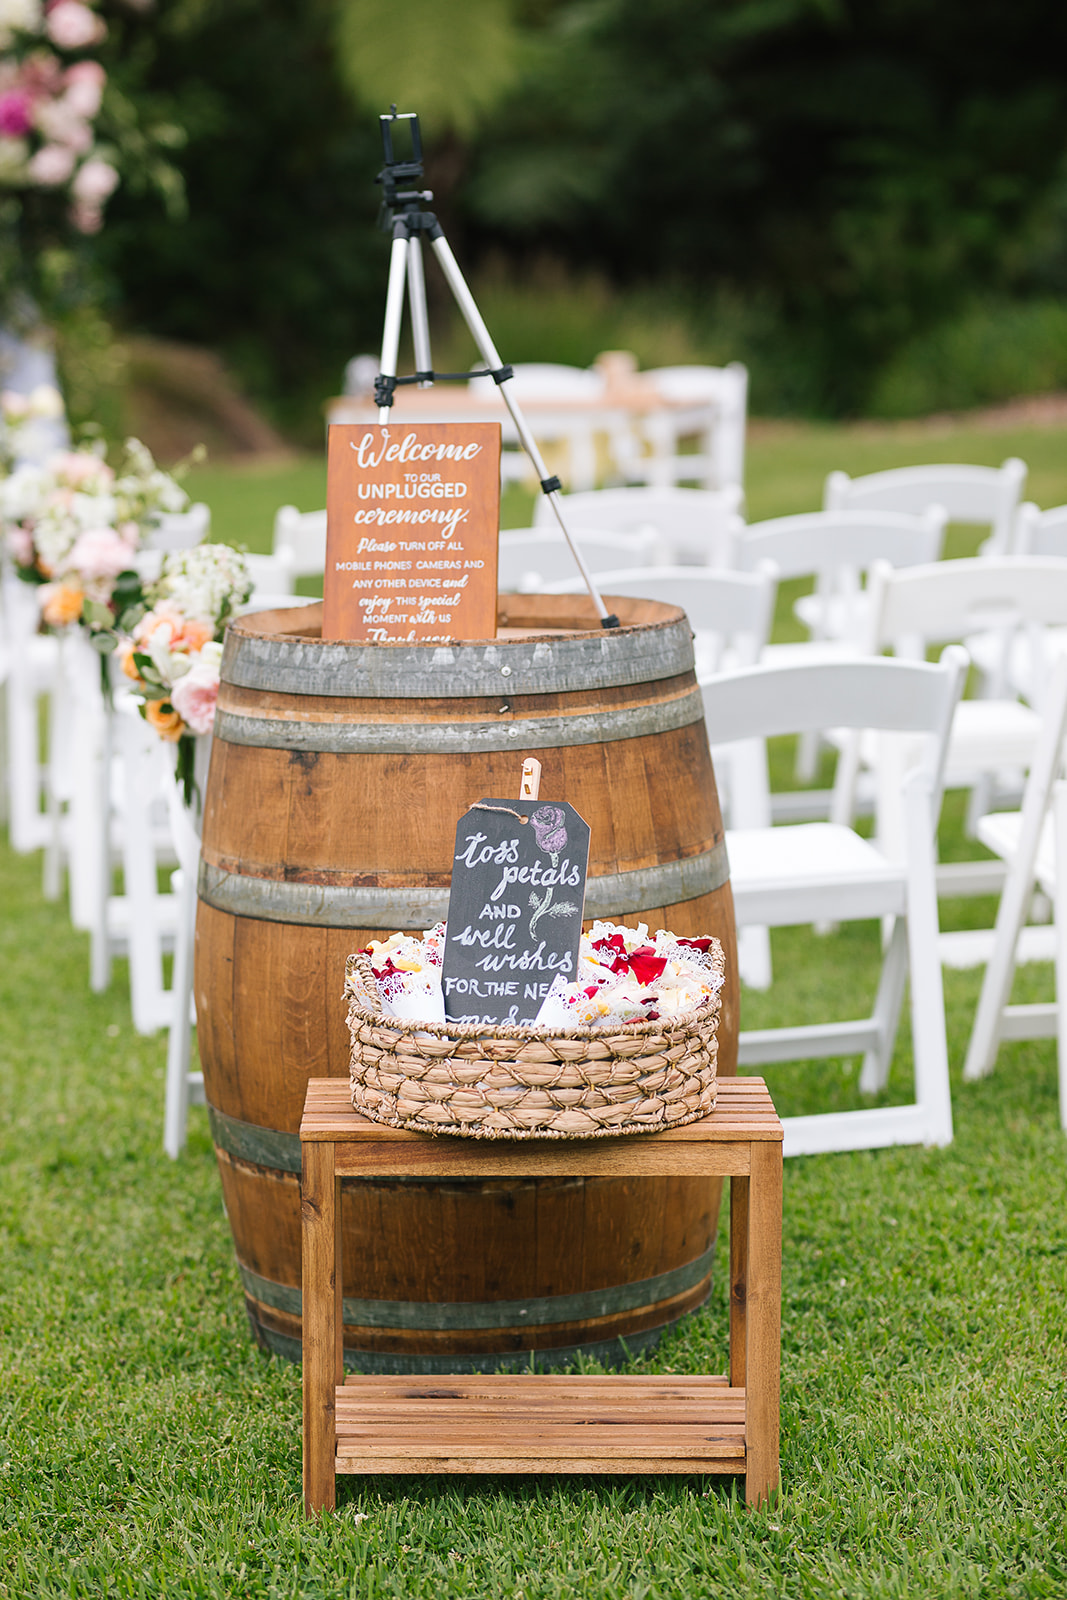 Wine Barrel and Welcome Sign at Wedding Reception in Garden